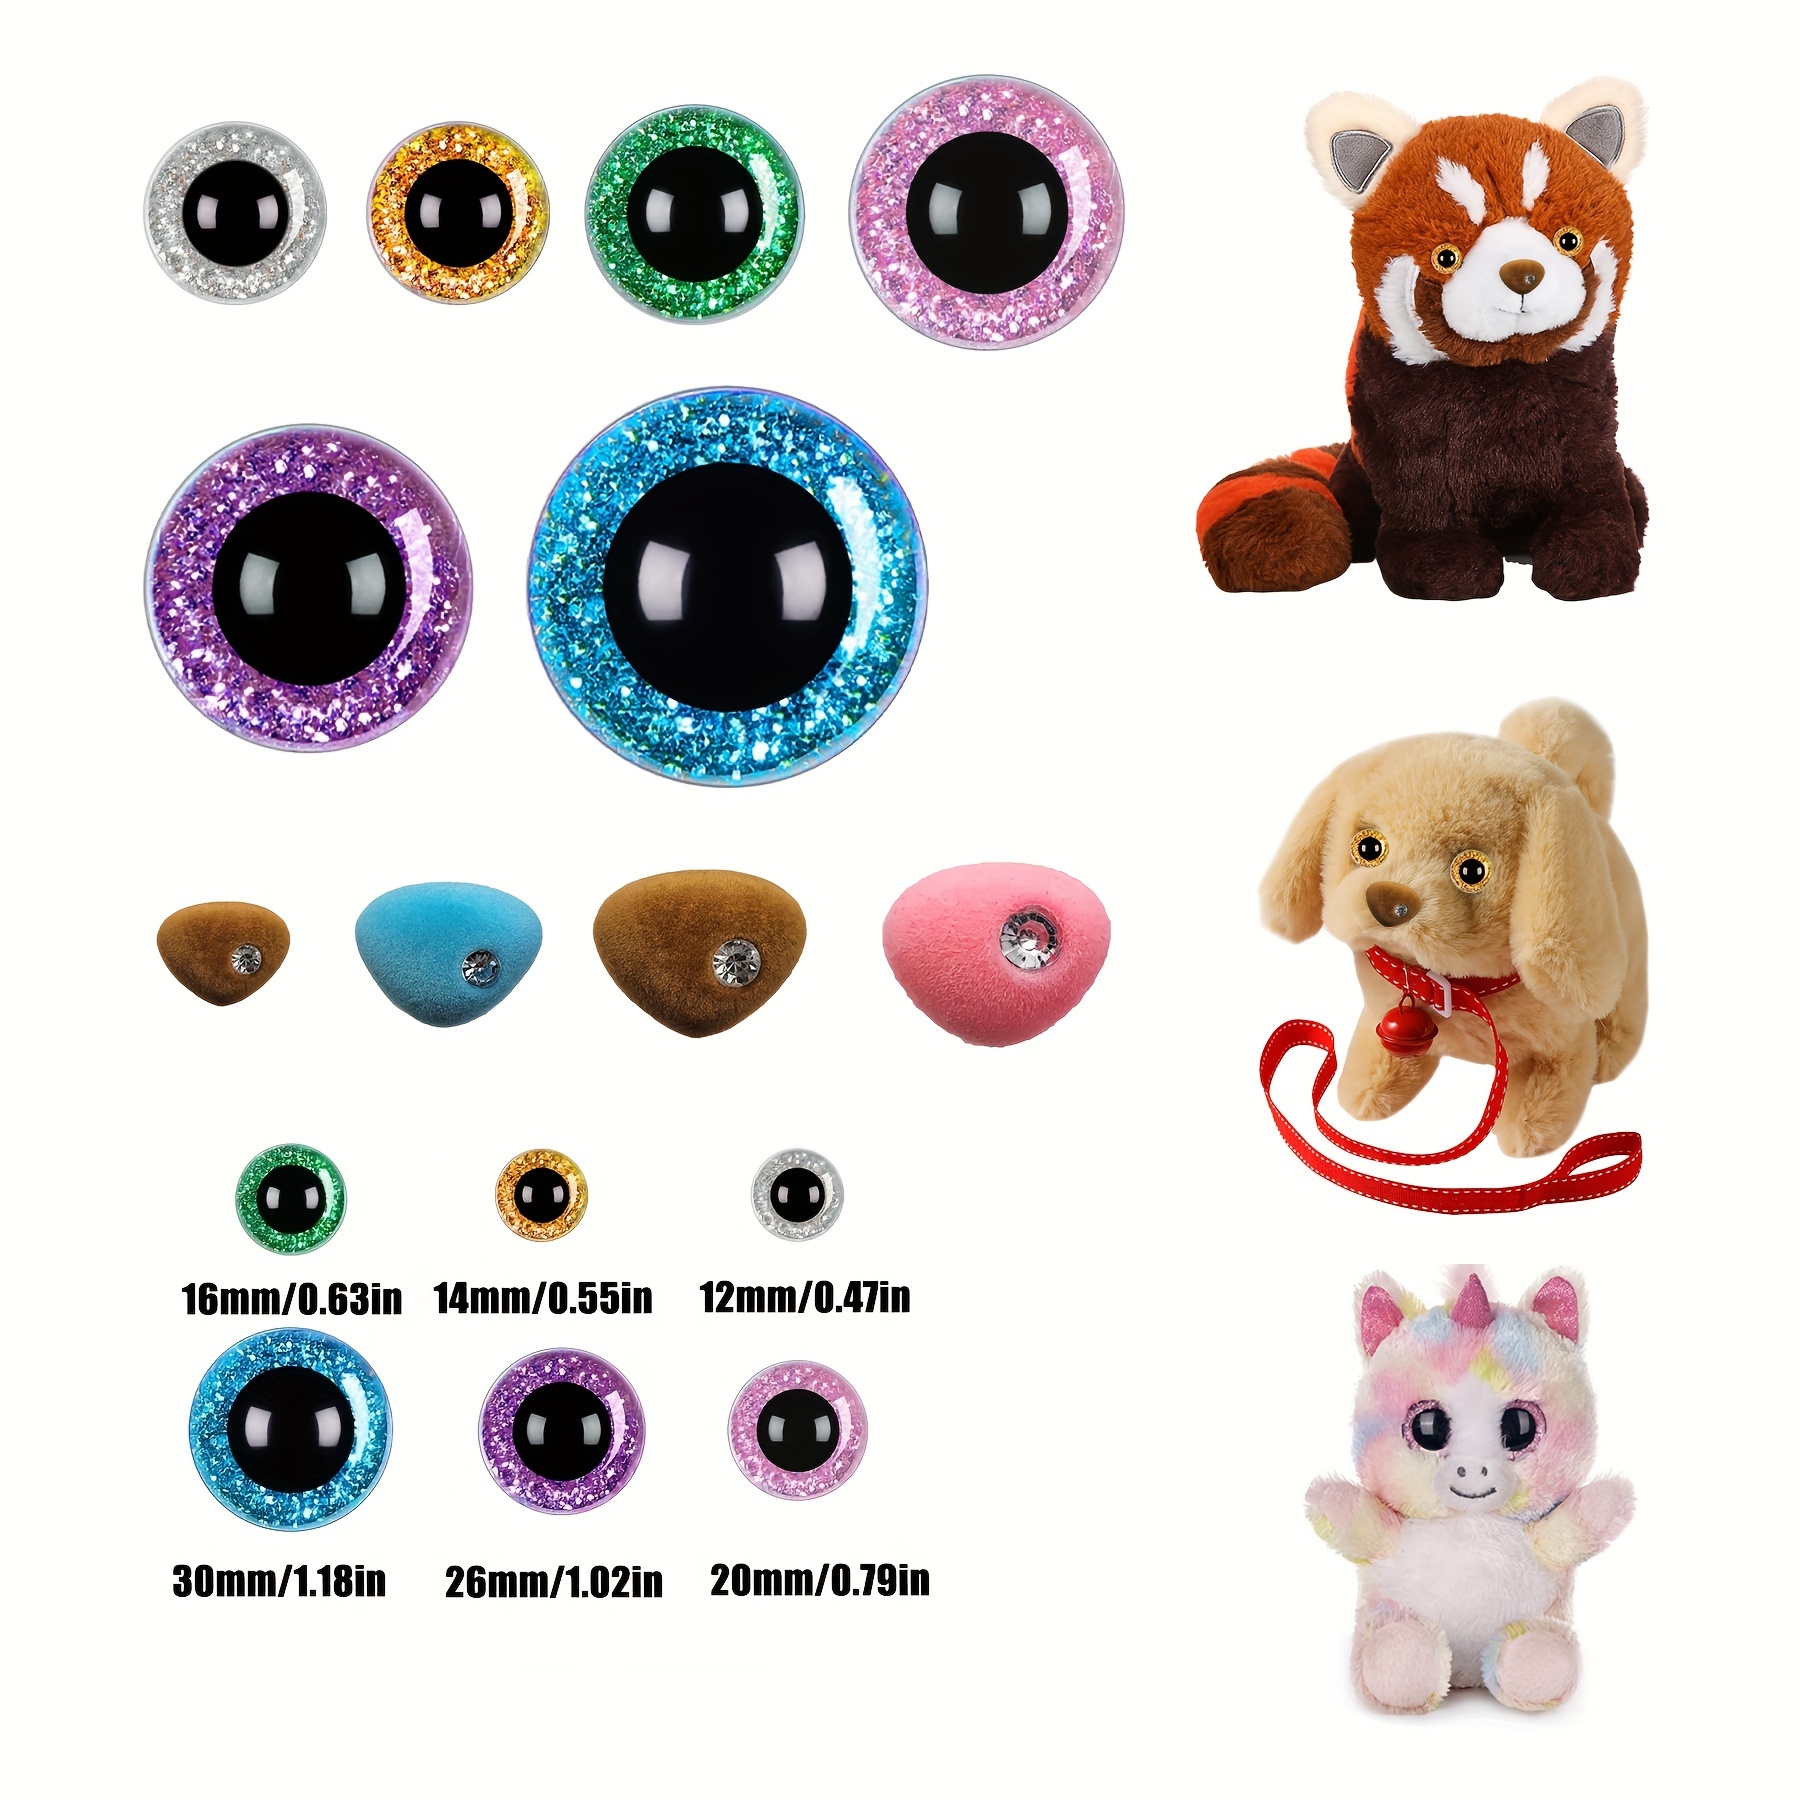 Assorted Color Safety Eyes and Nose for Amigurumi Teddy Bear Toys